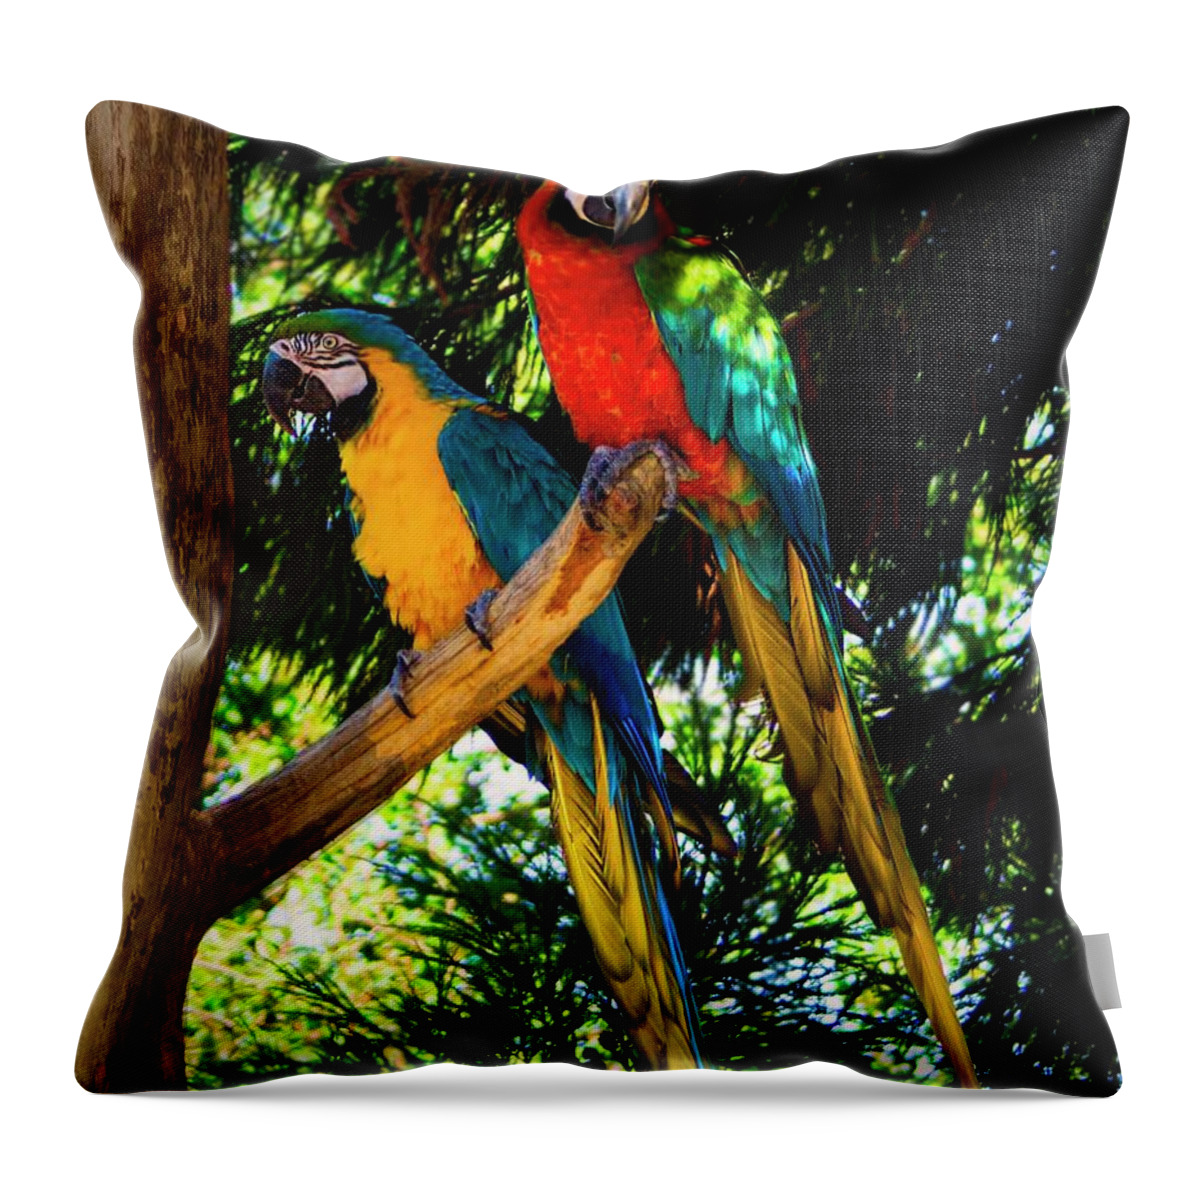 Parrott Throw Pillow featuring the photograph Image Of The Parrott by M Three Photos